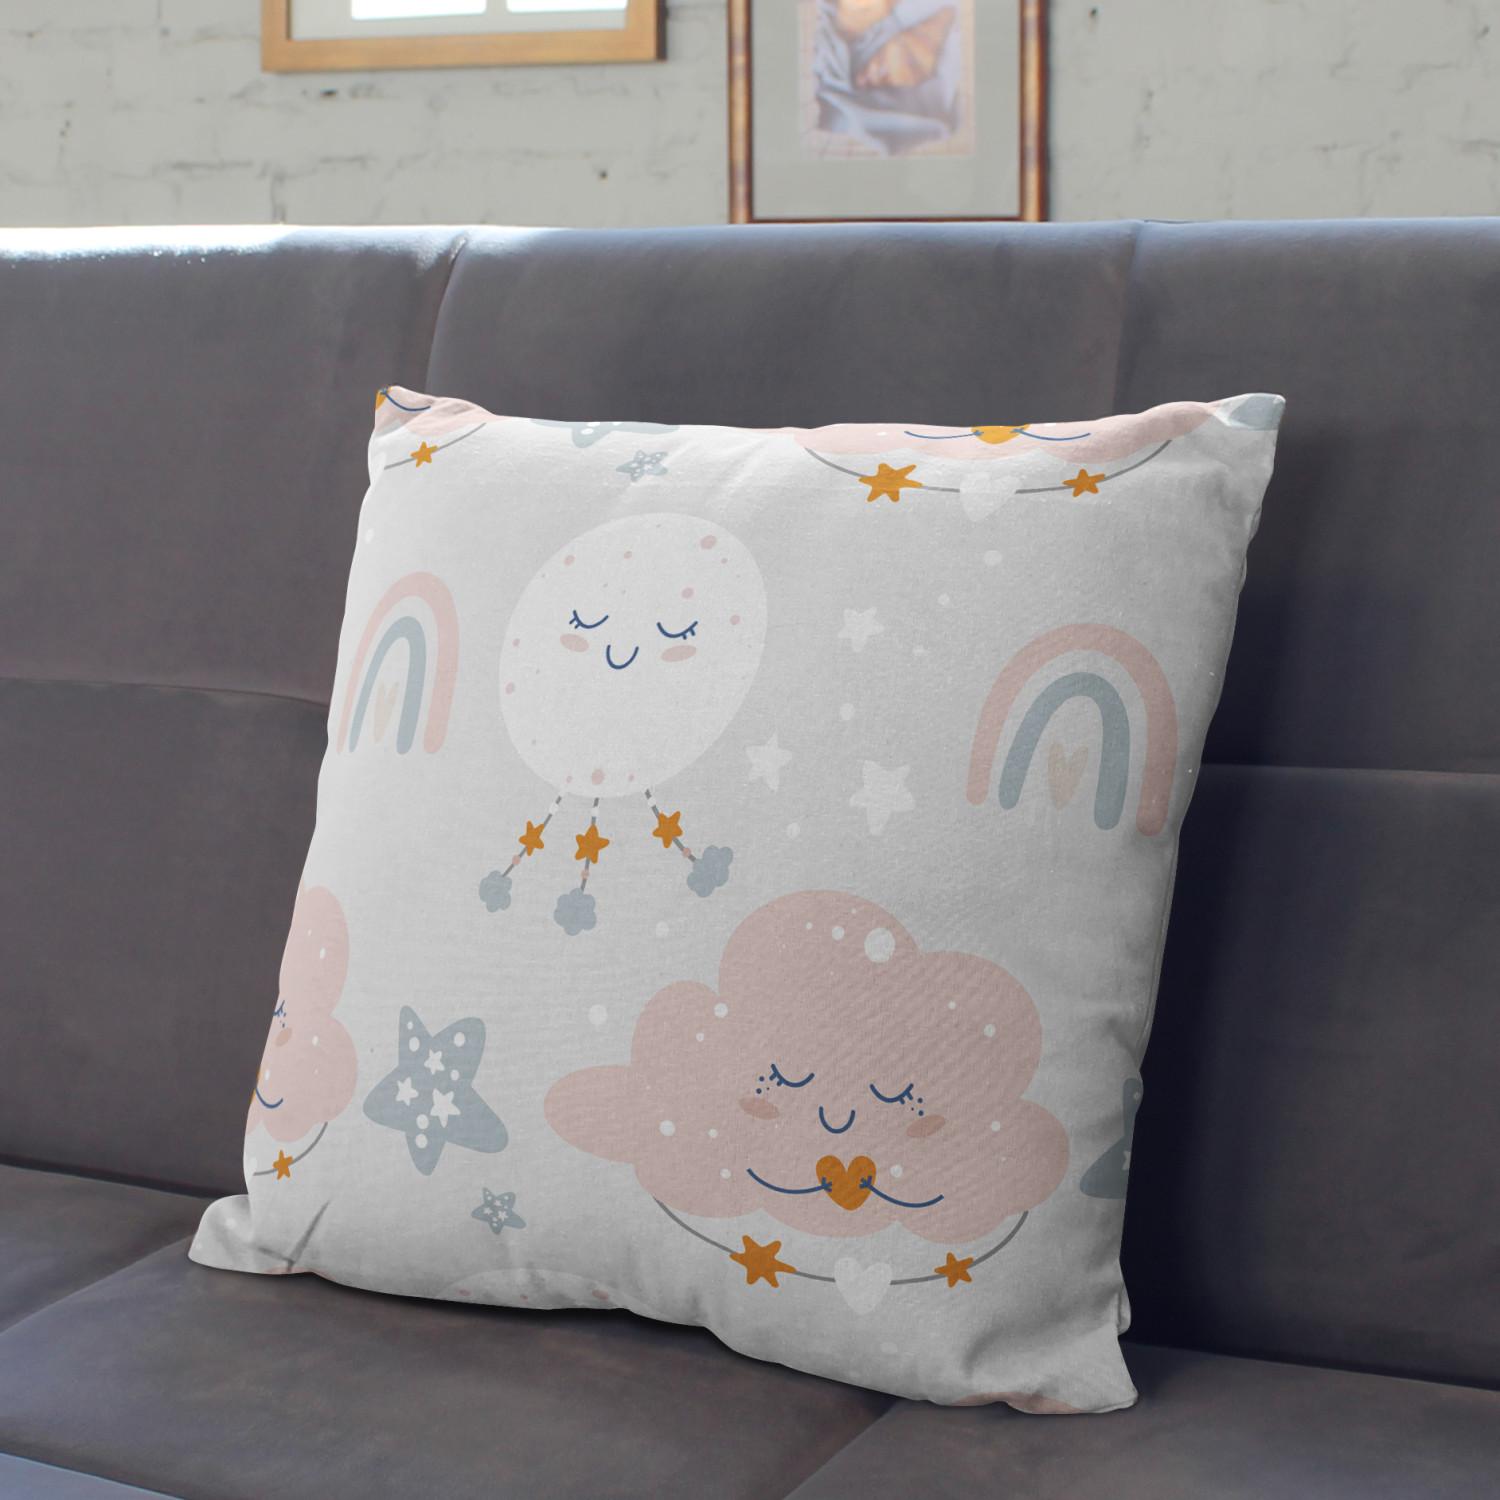 Decorative Microfiber Pillow Playful clouds - a composition in subdued colour palette cushions